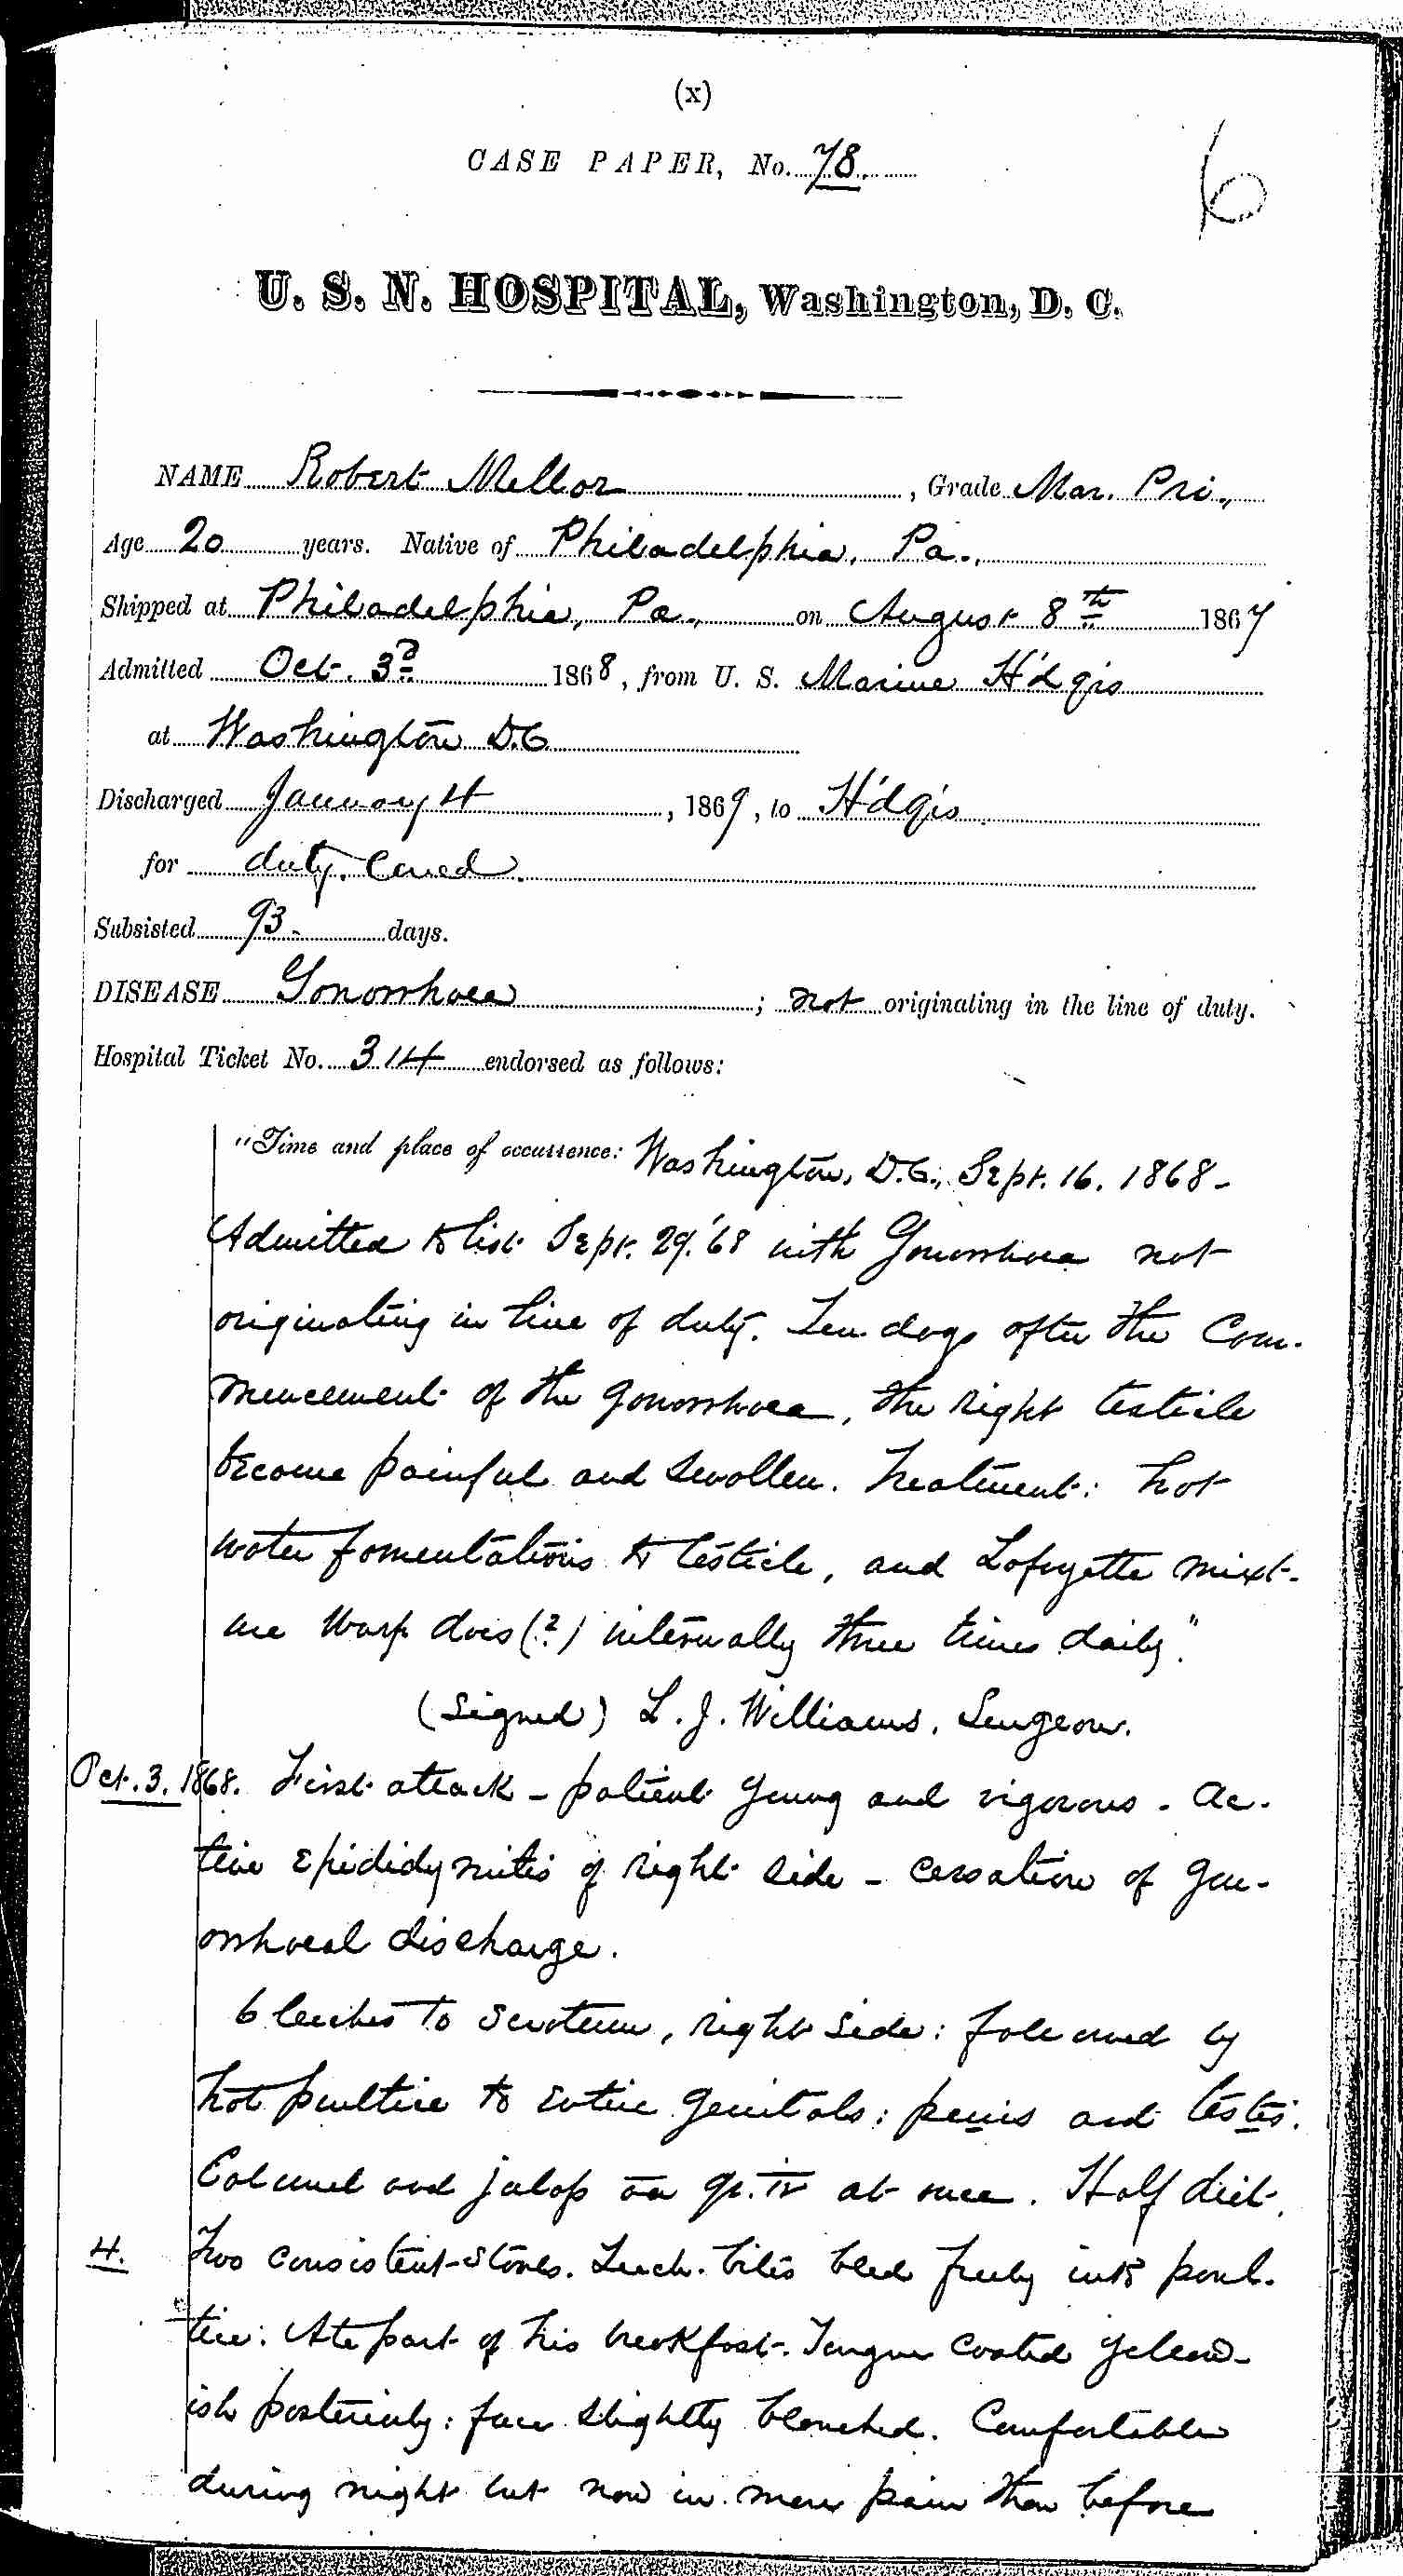 Entry for Robert Mellor (first admission page 1 of 9) in the log Hospital Tickets and Case Papers - Naval Hospital - Washington, D.C. - 1868-69